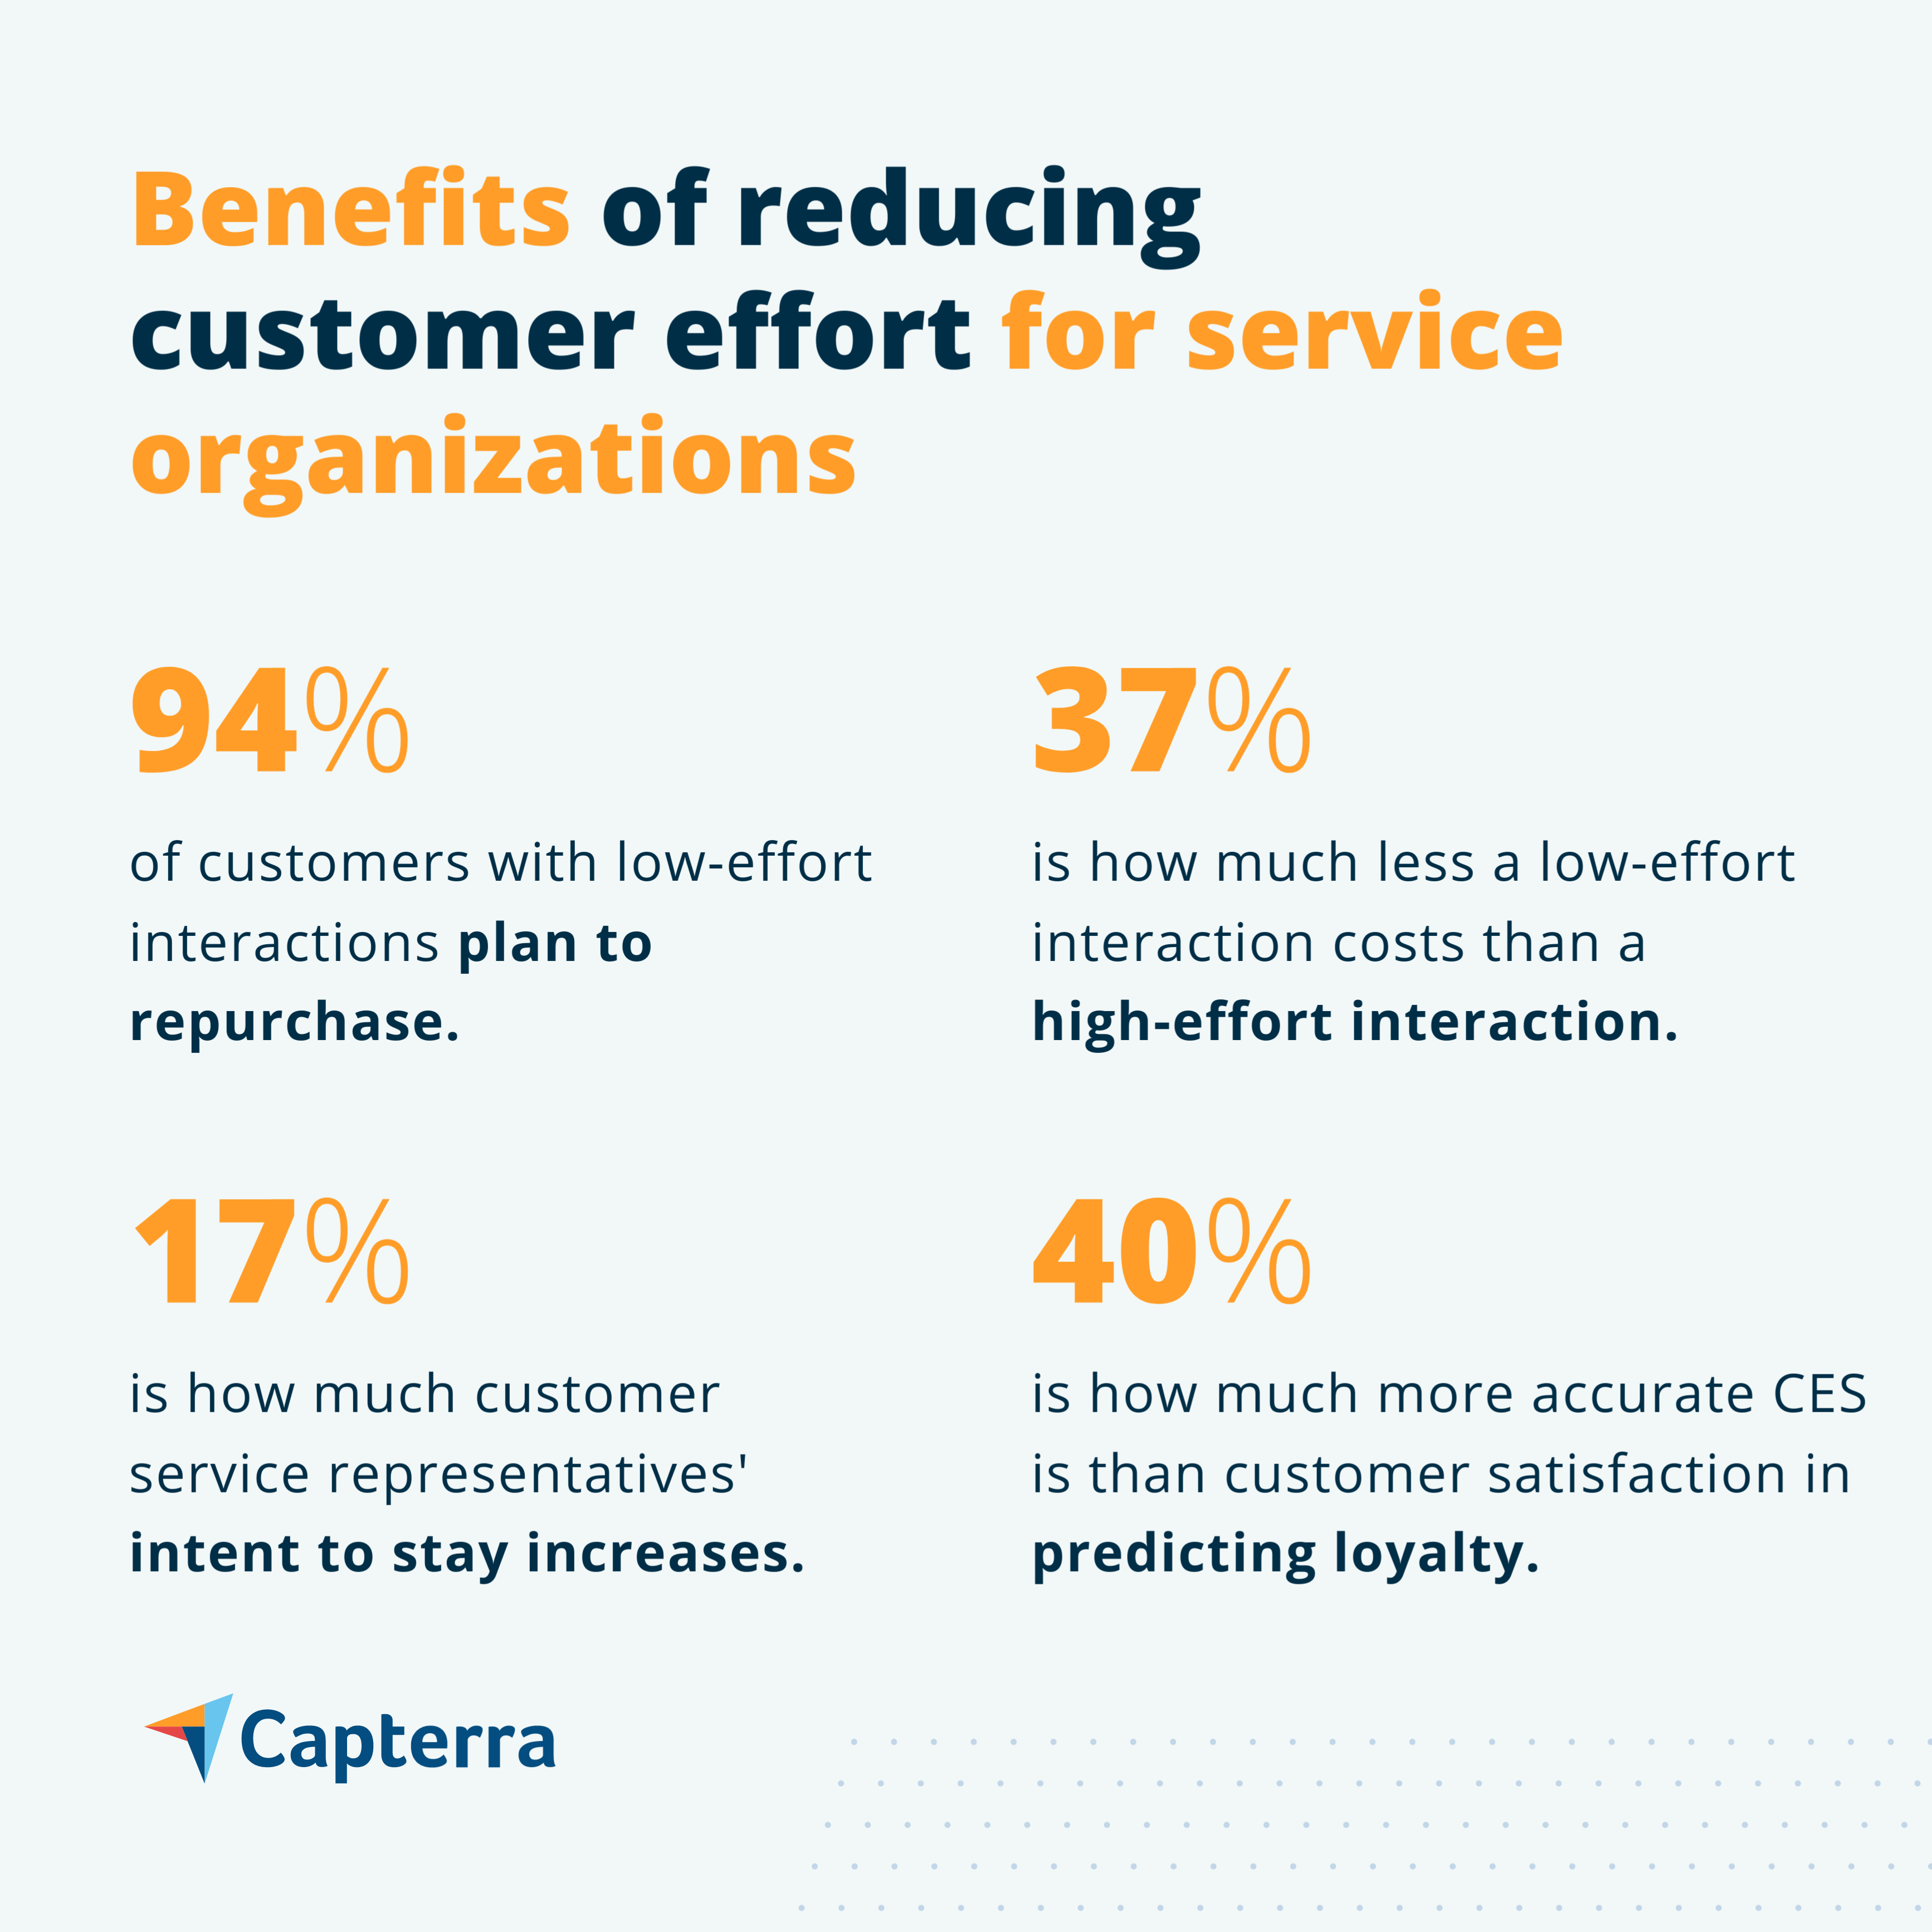 Benefits of reducing customer effort for service orgs graphic for the blog article "4 Retention Metrics Customer Service Teams Should Track"